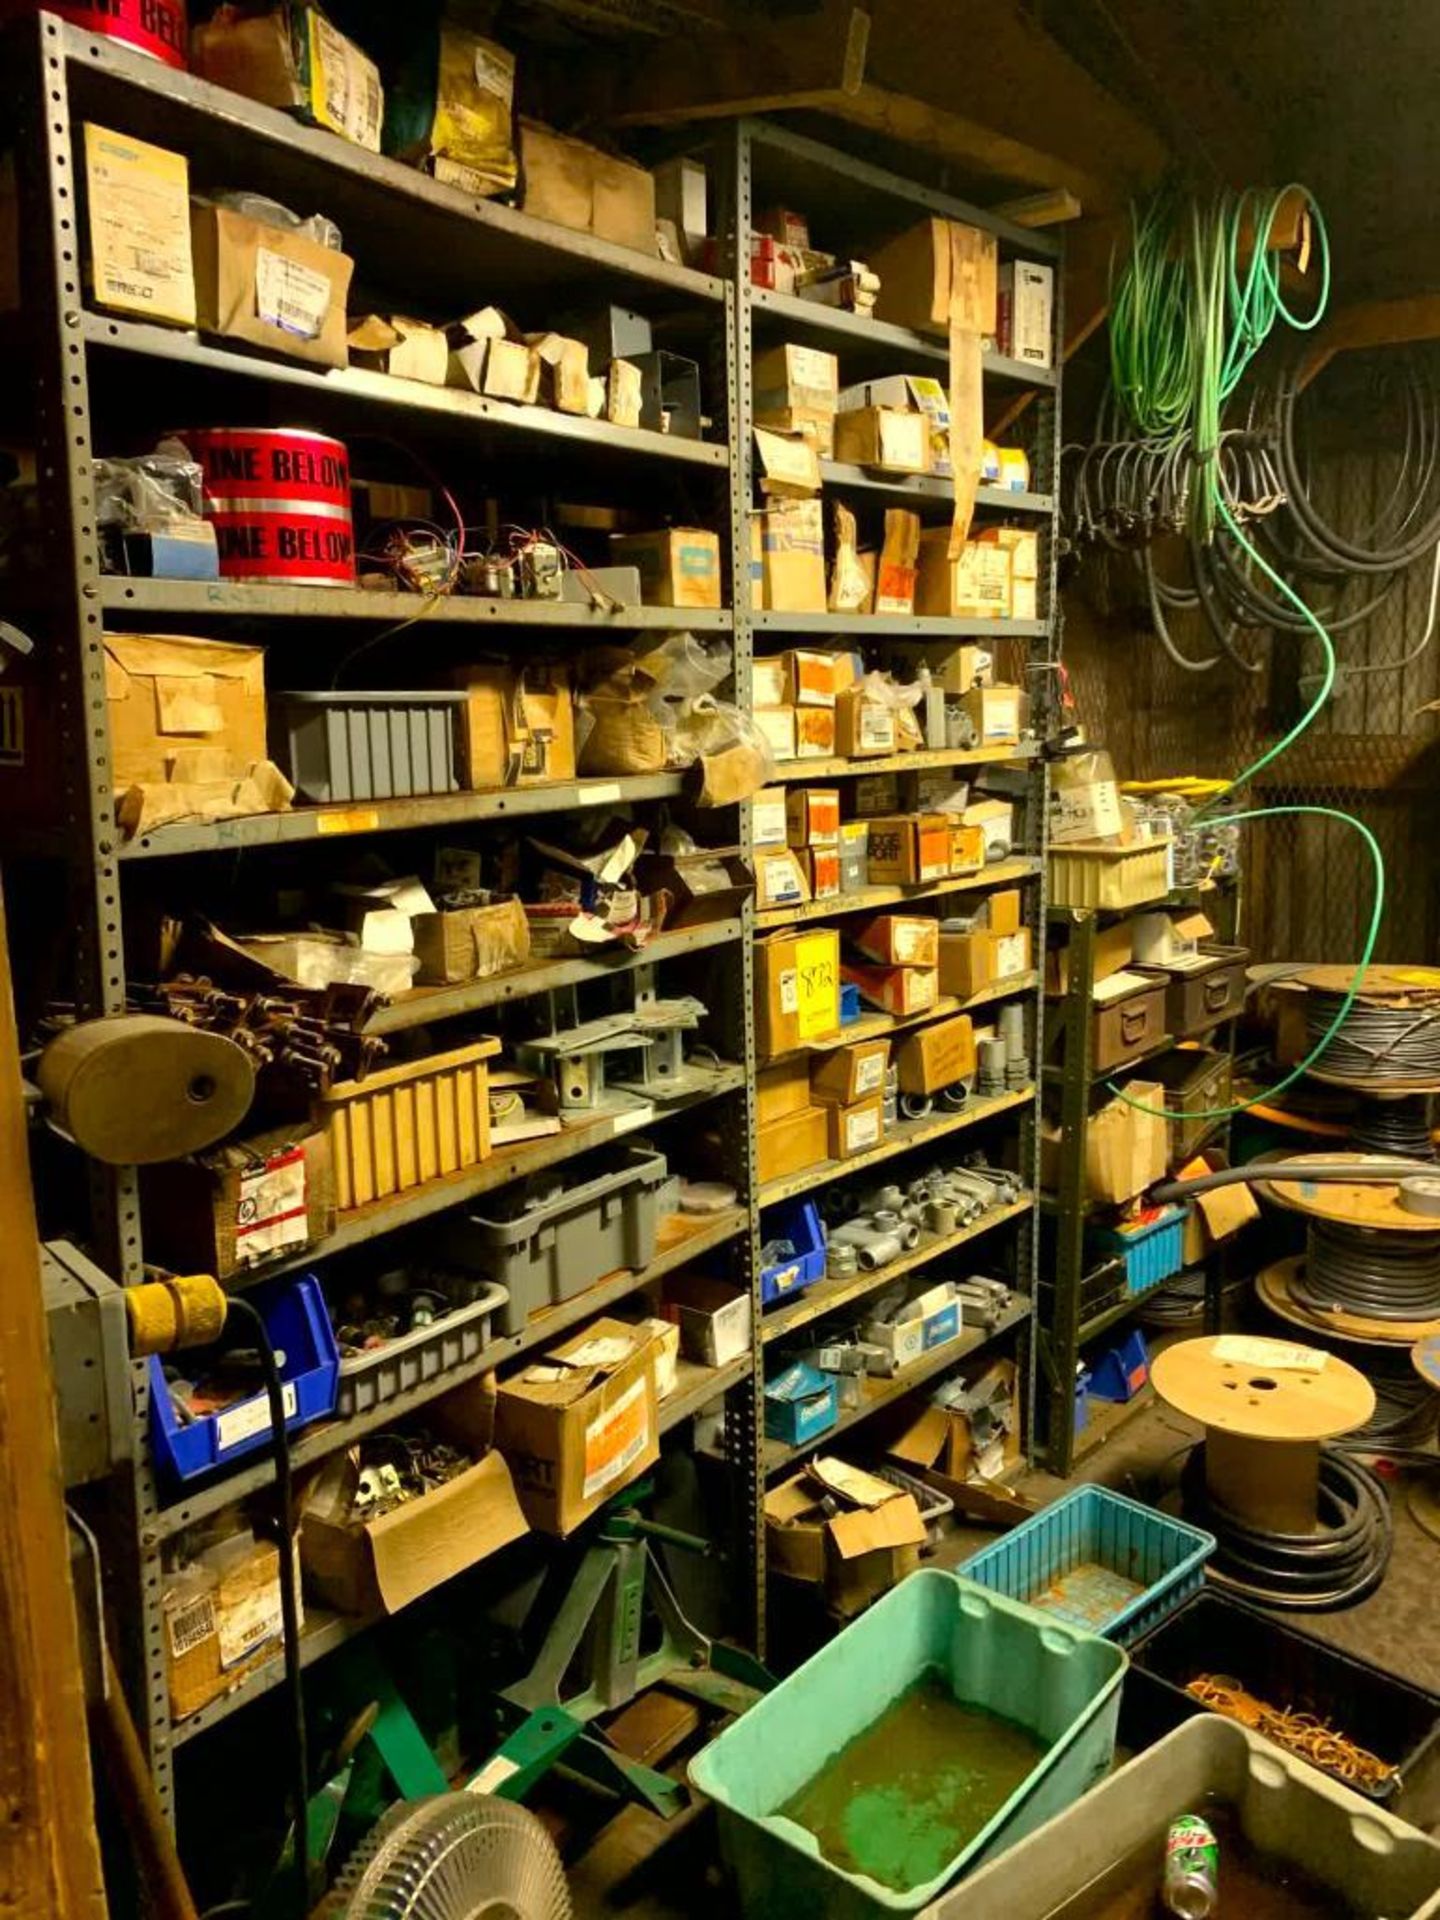 Content of Electrical Supply Room; Spools of Wire, Couplings, Breakers, Fuses, & Much More - Image 2 of 18